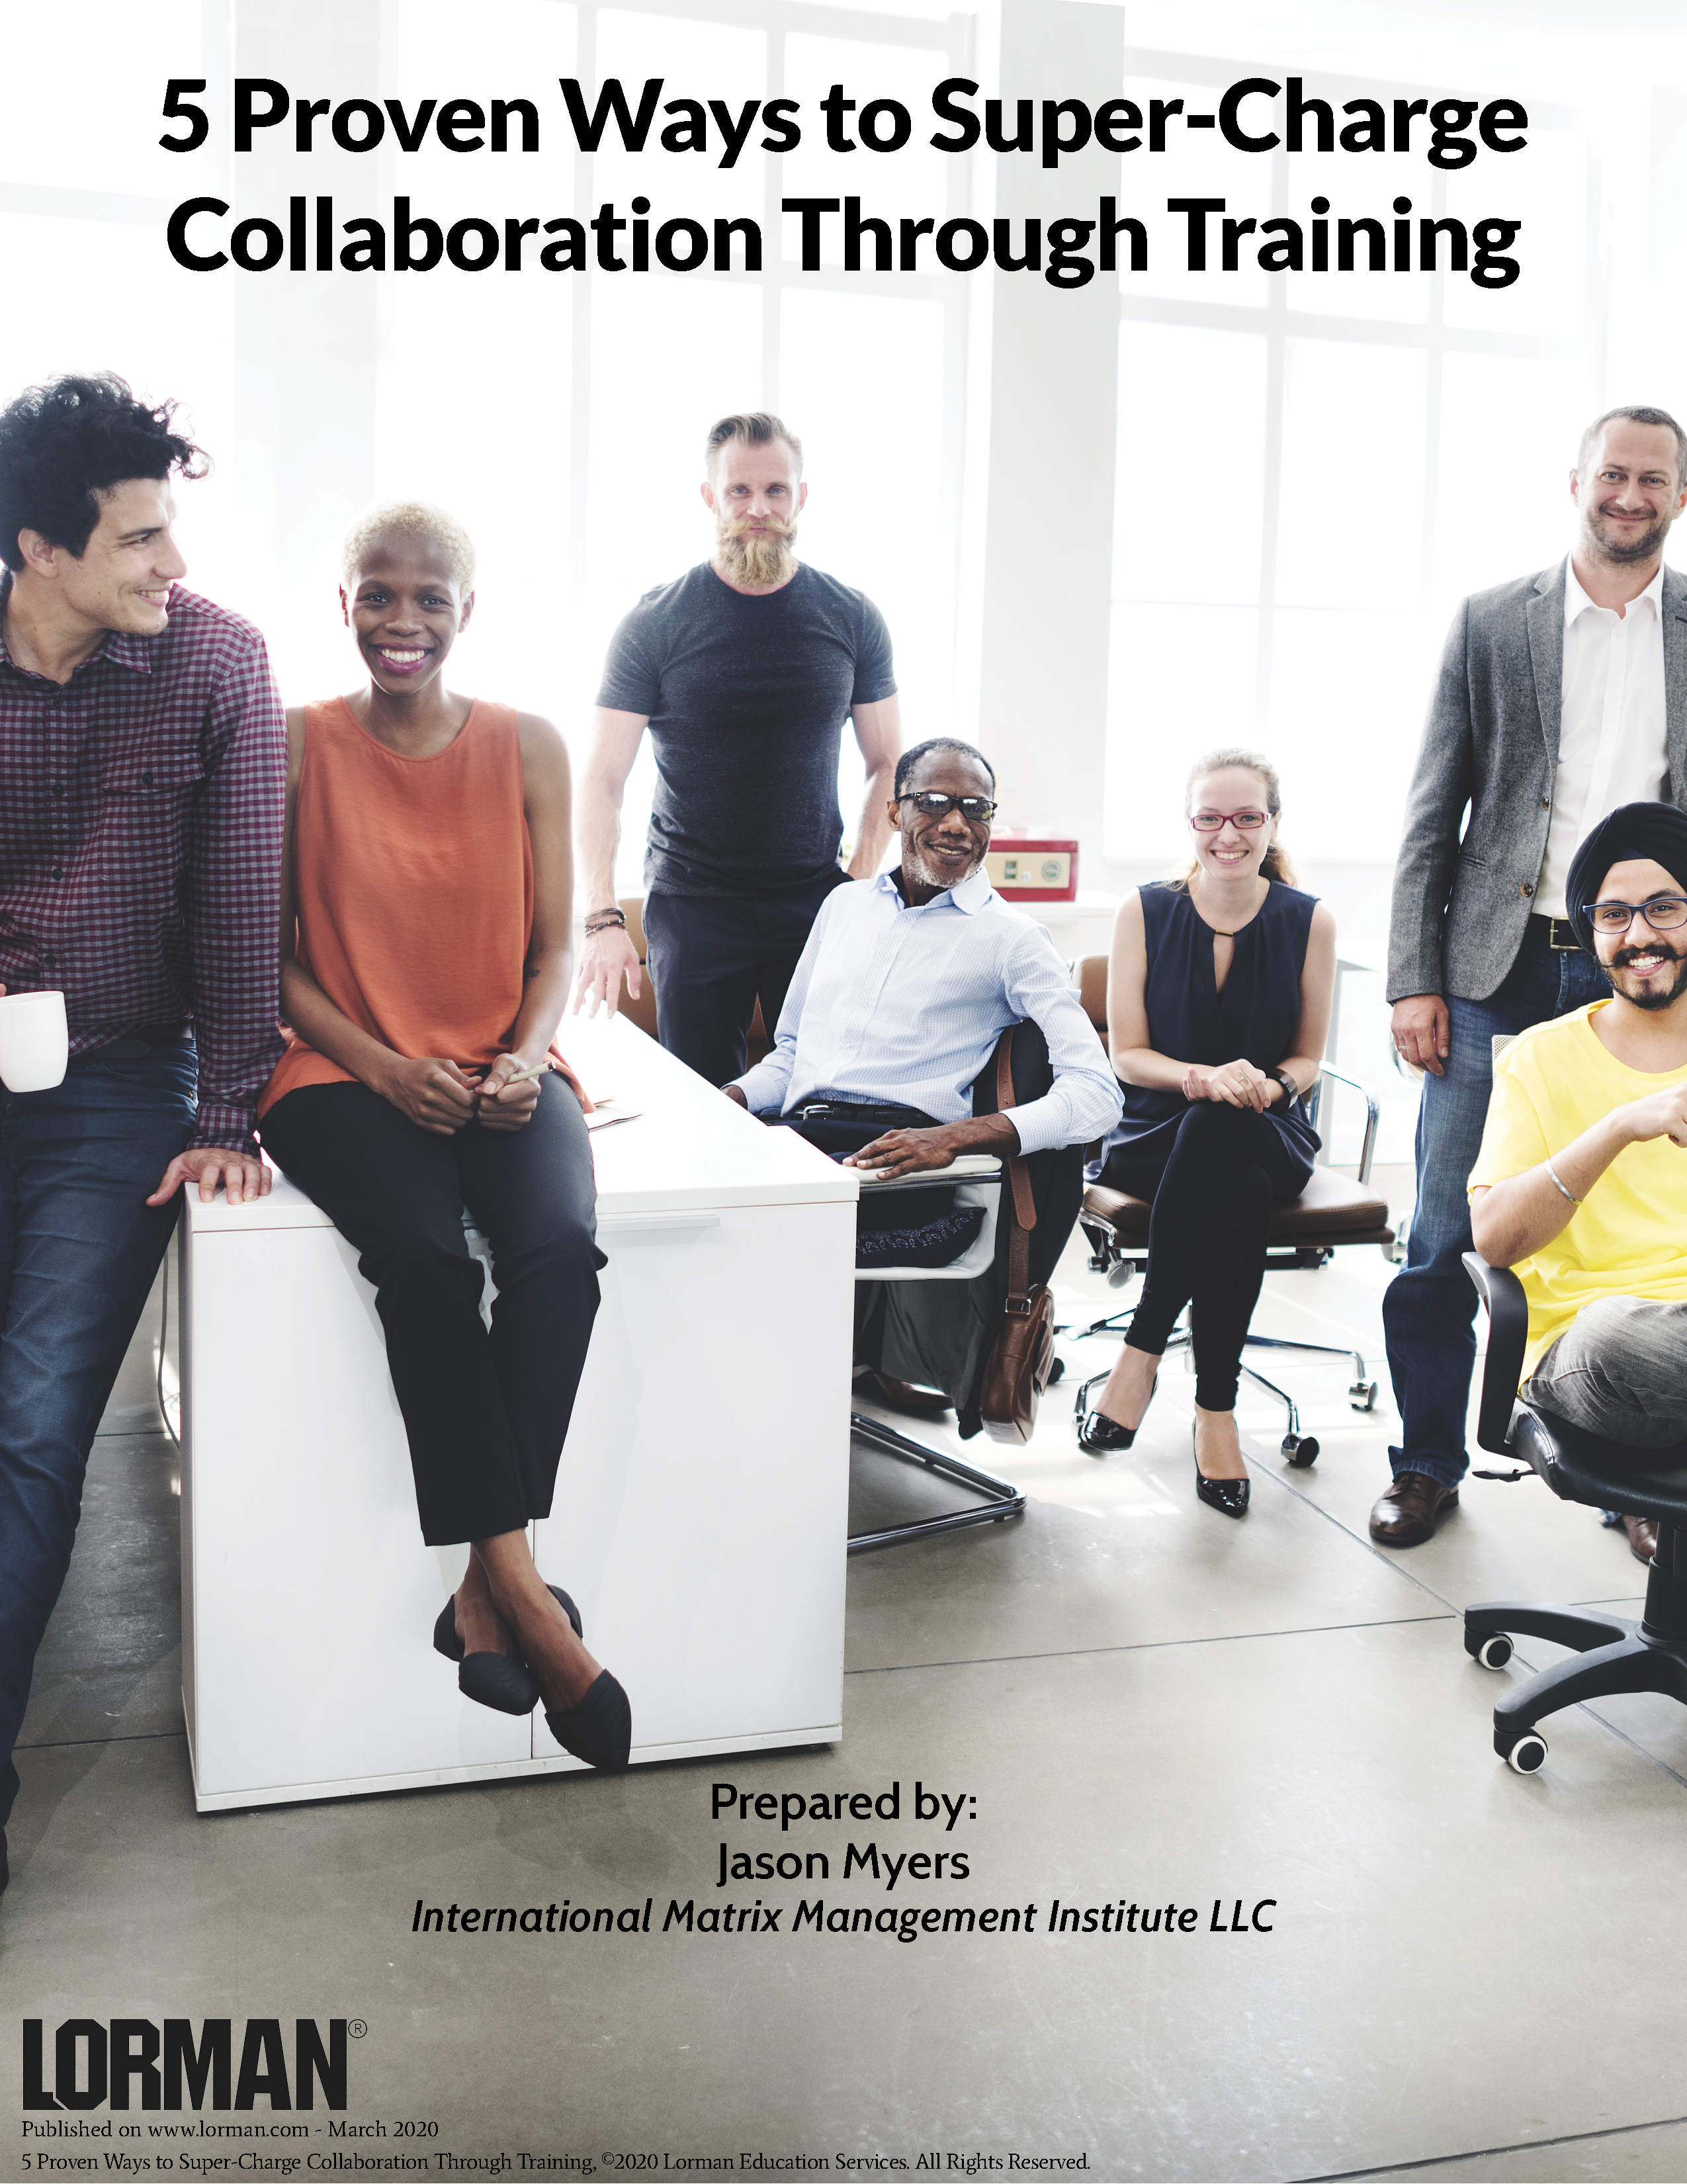 5 Proven Ways to Super-Charge Collaboration Through Training